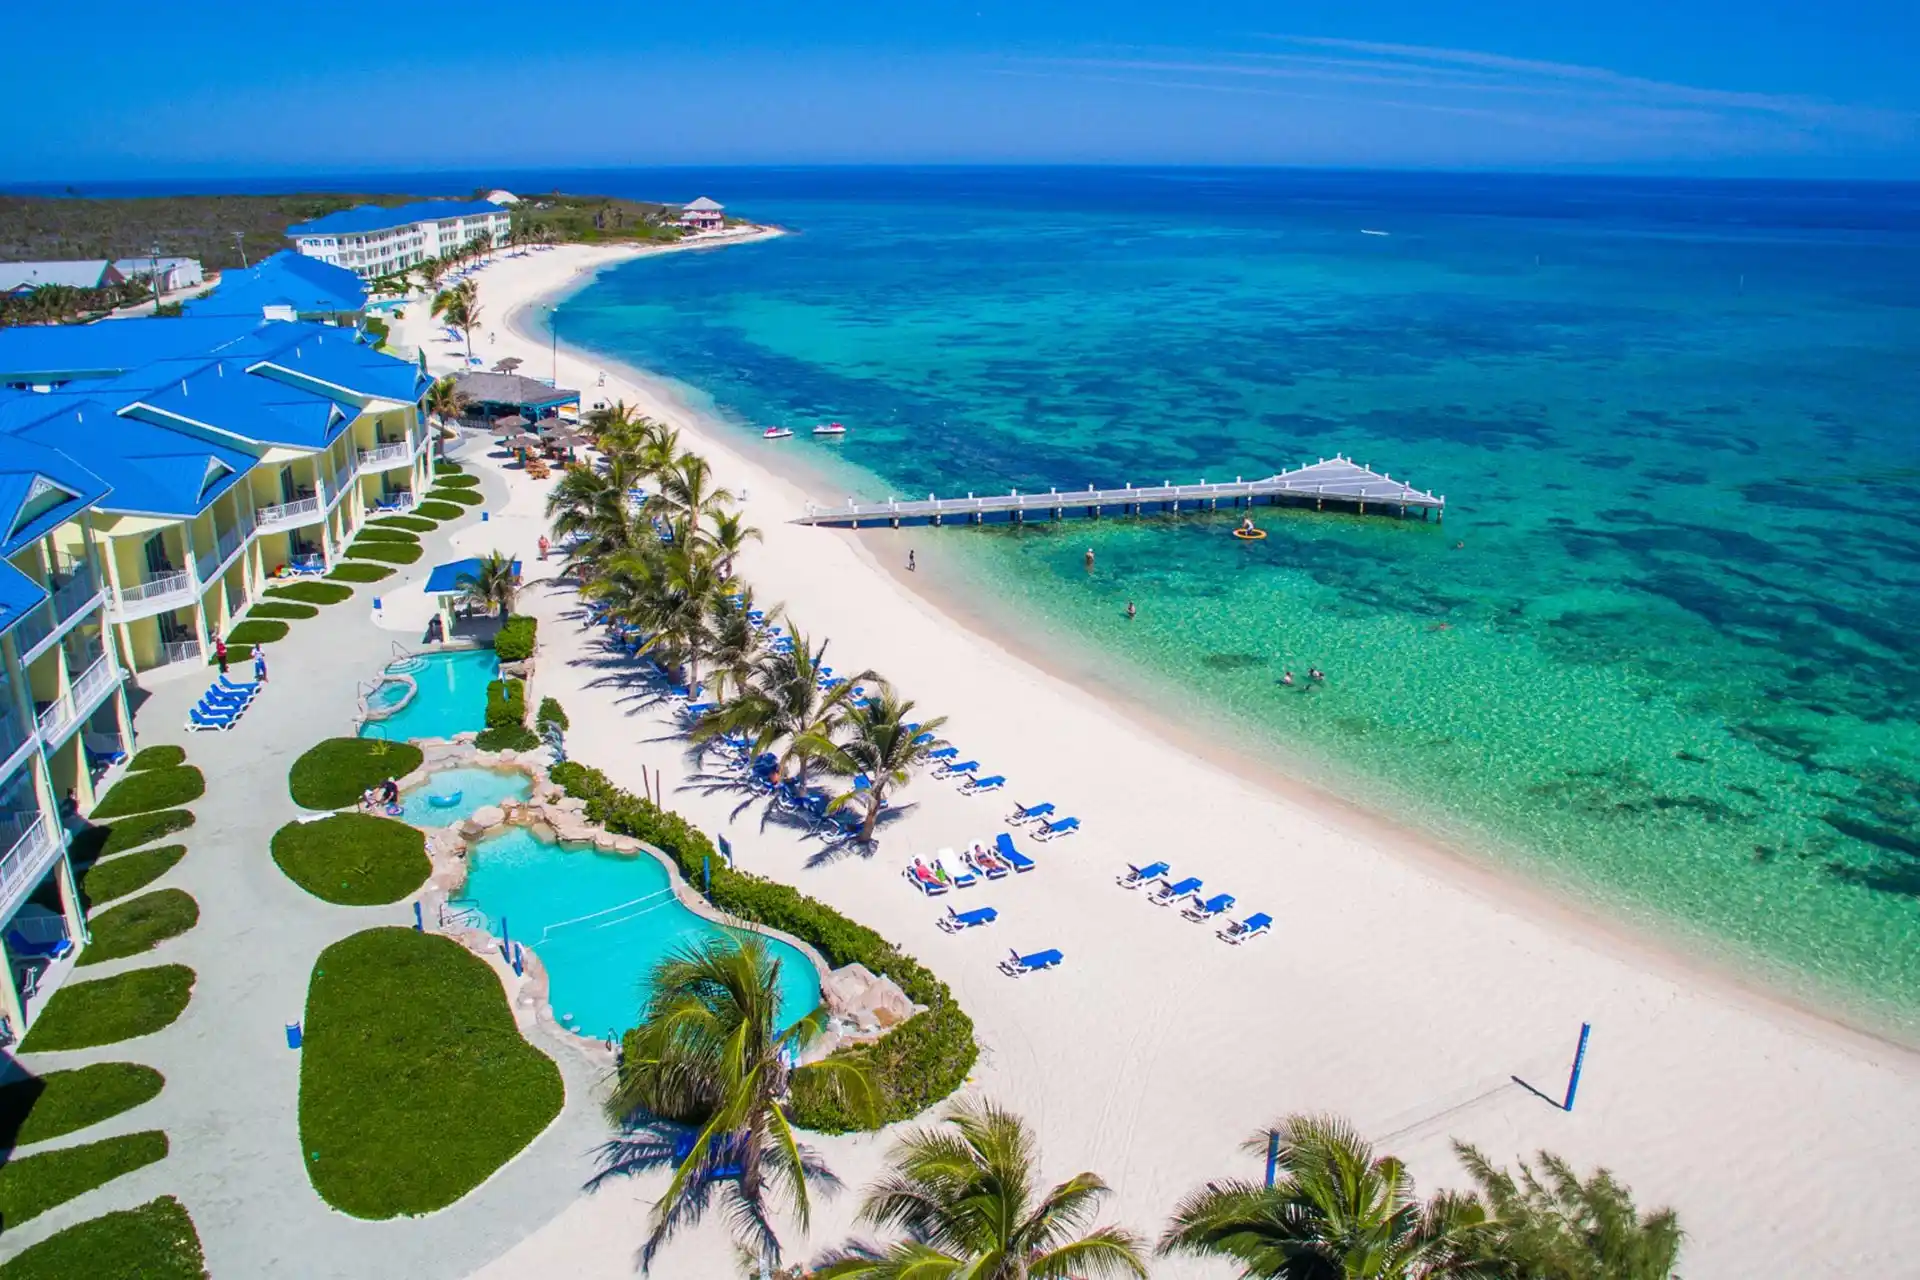 The Islands of Grand Cayman